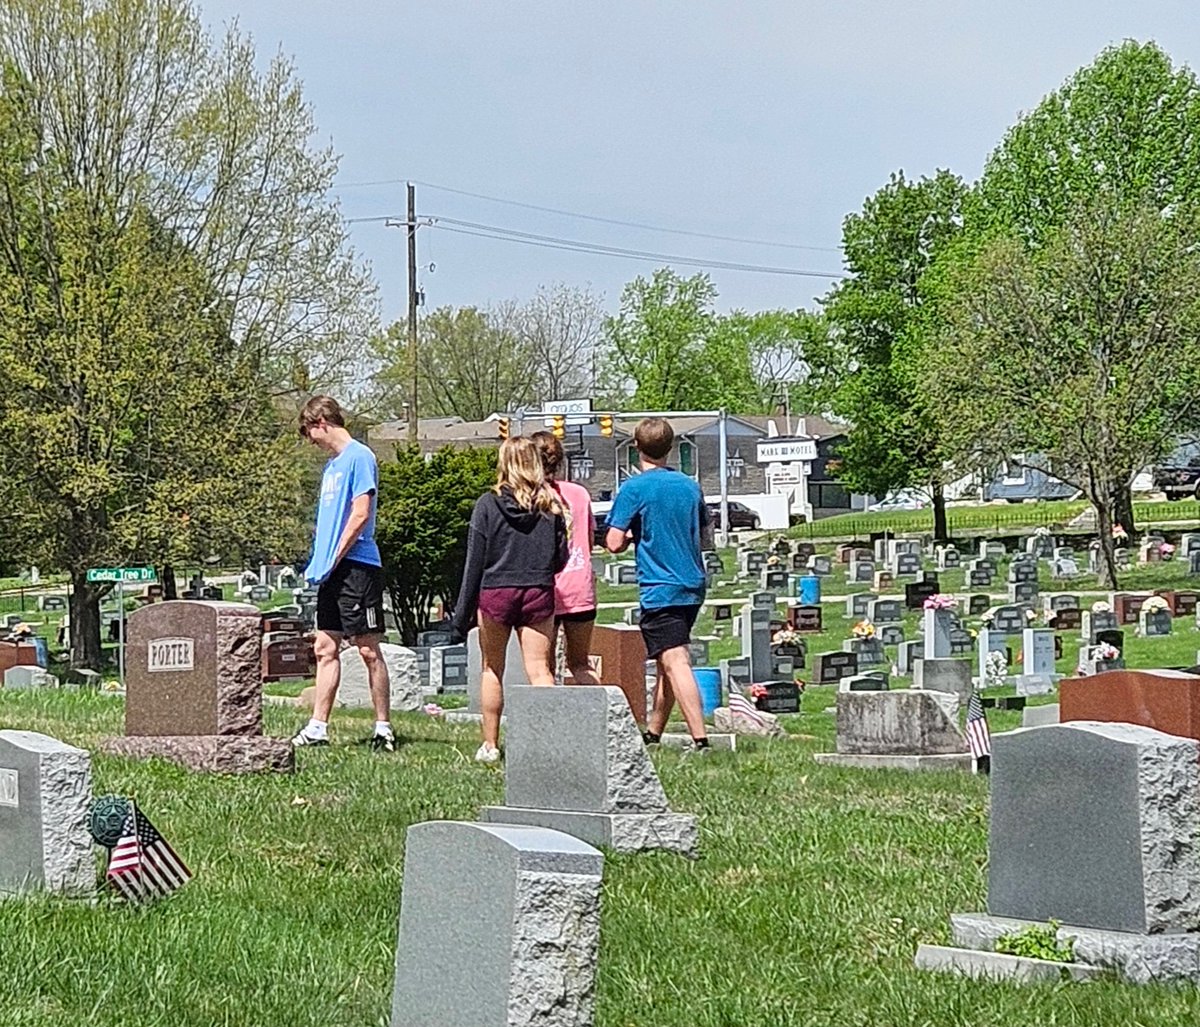 Students in our shared Biology II class were out in the field to gather birth and death dates from various cemeteries in Martin, Orange and Lawrence counties for their Human Population Ecology lab! #sharedcourse #ruraleducation